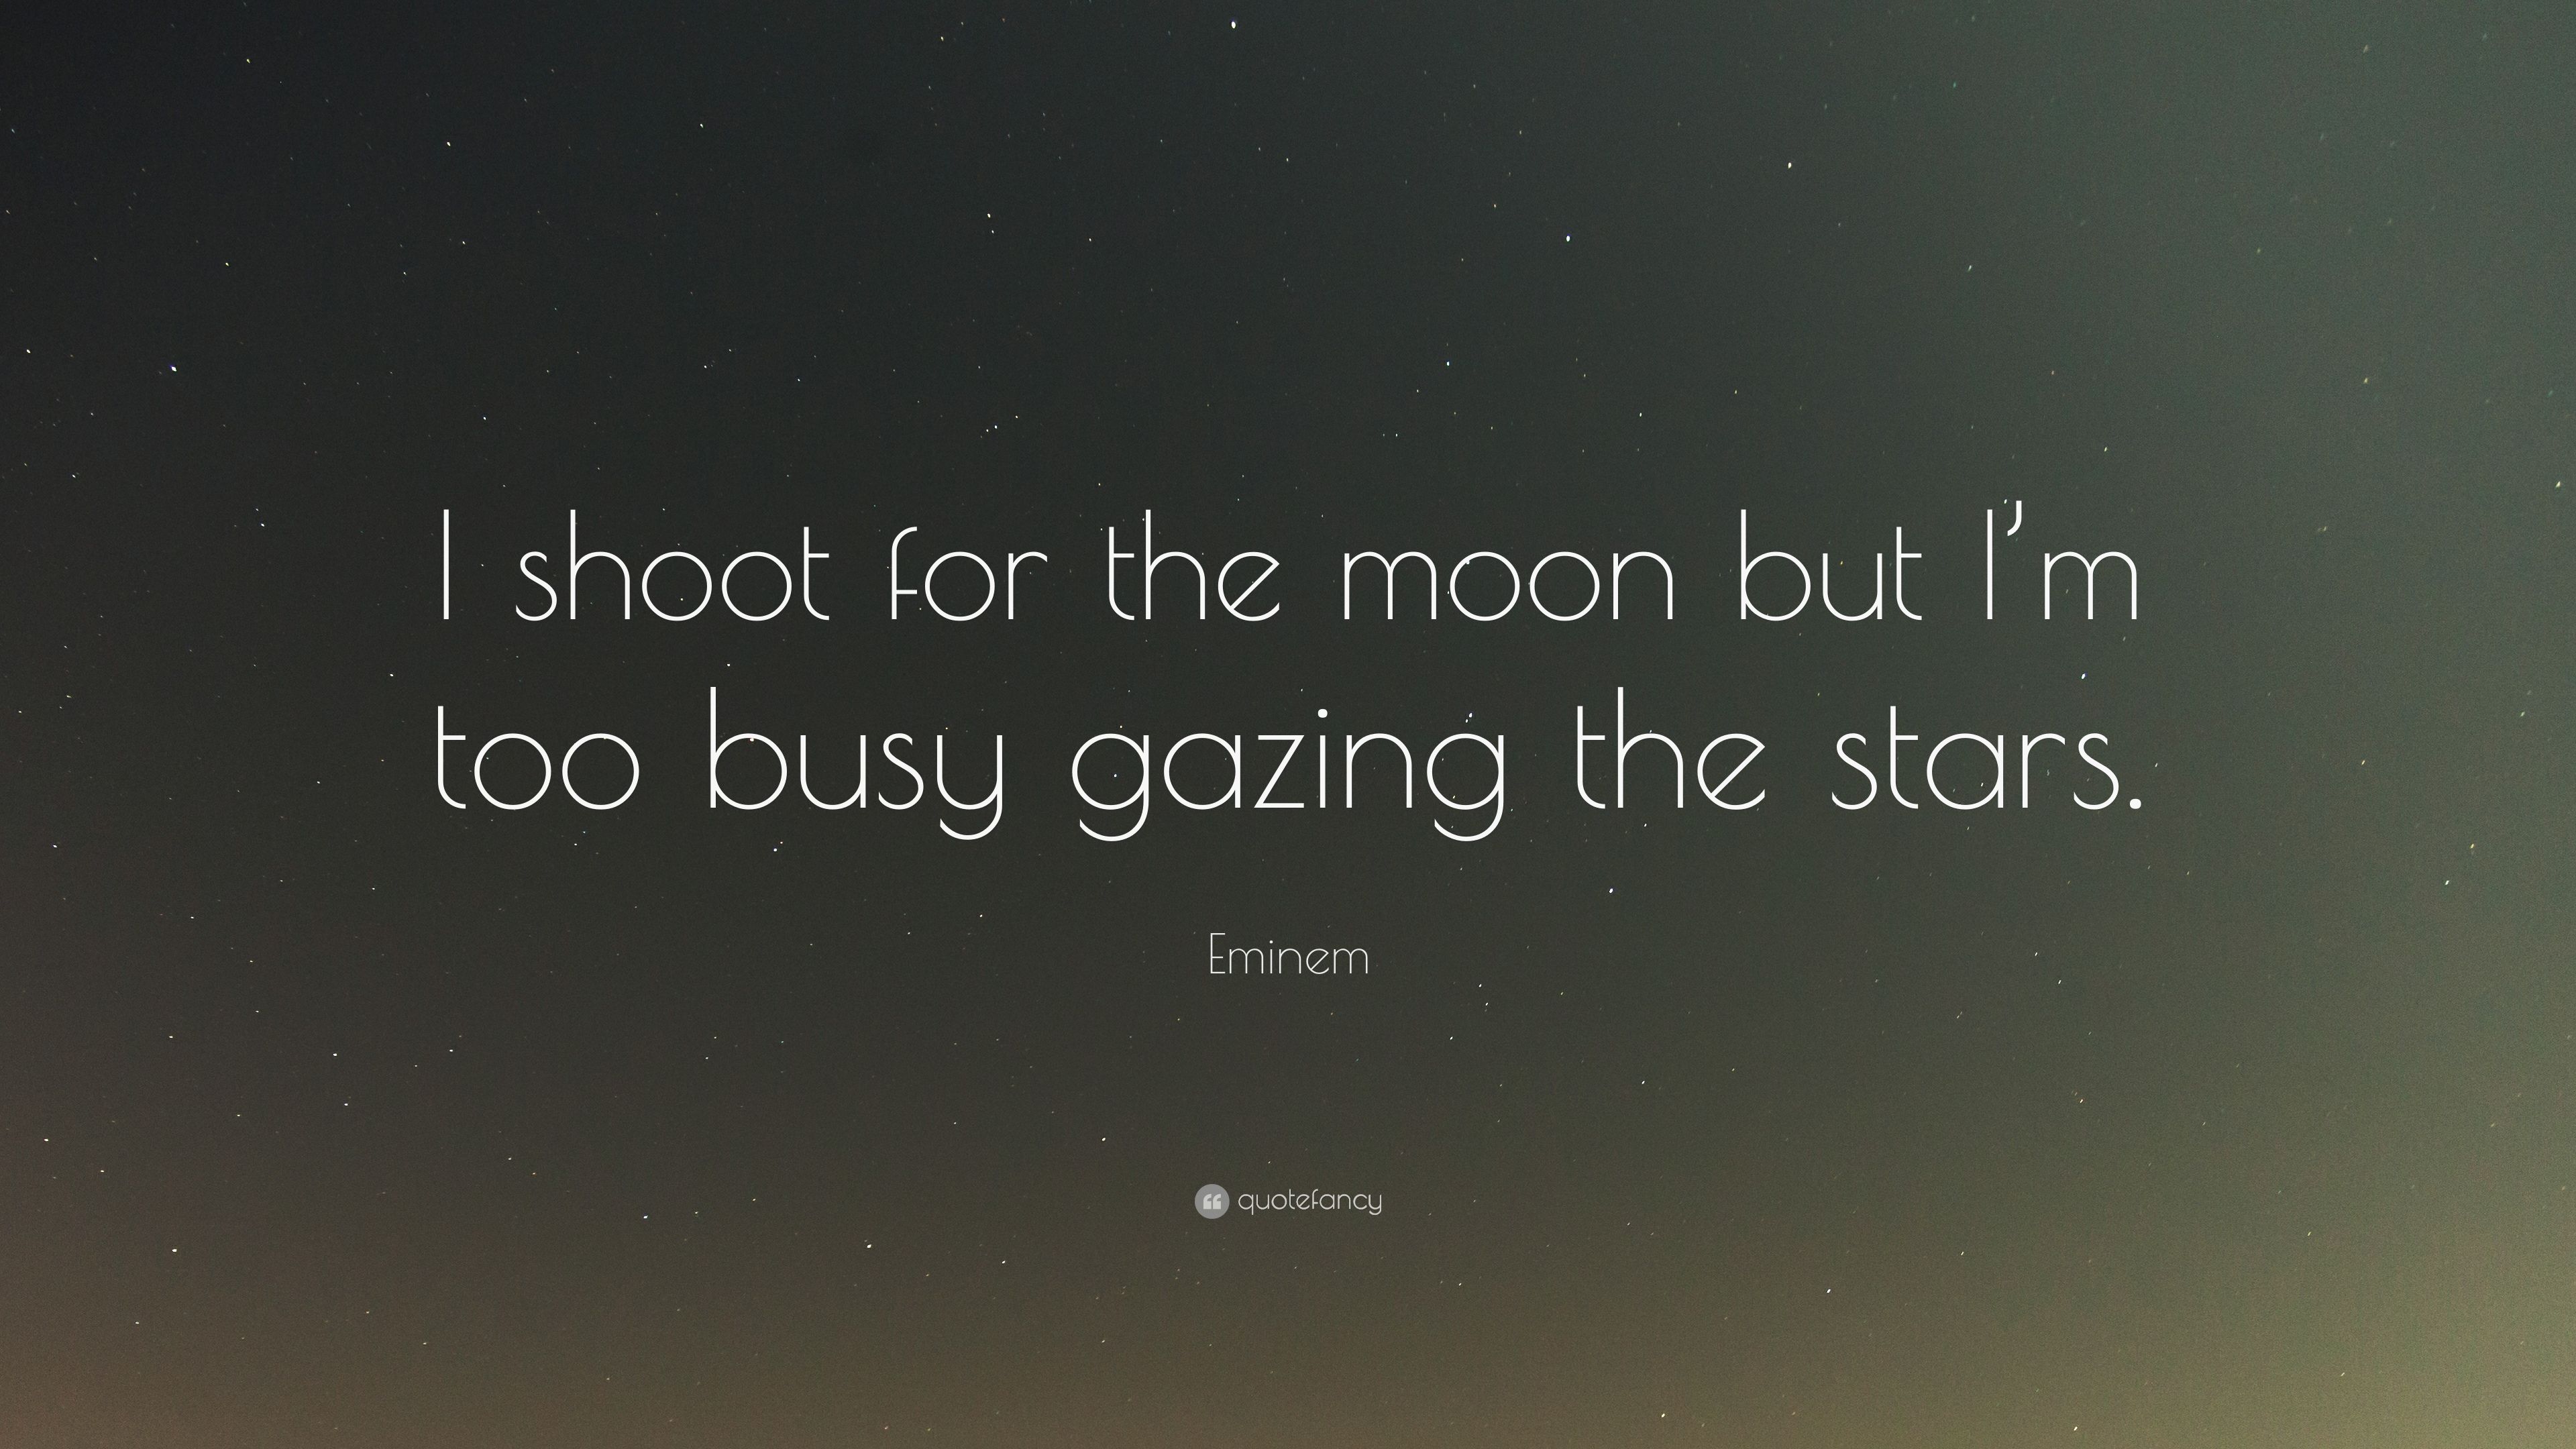 Shoot For The Stars Aim For The Moon Wallpapers Wallpaper Cave